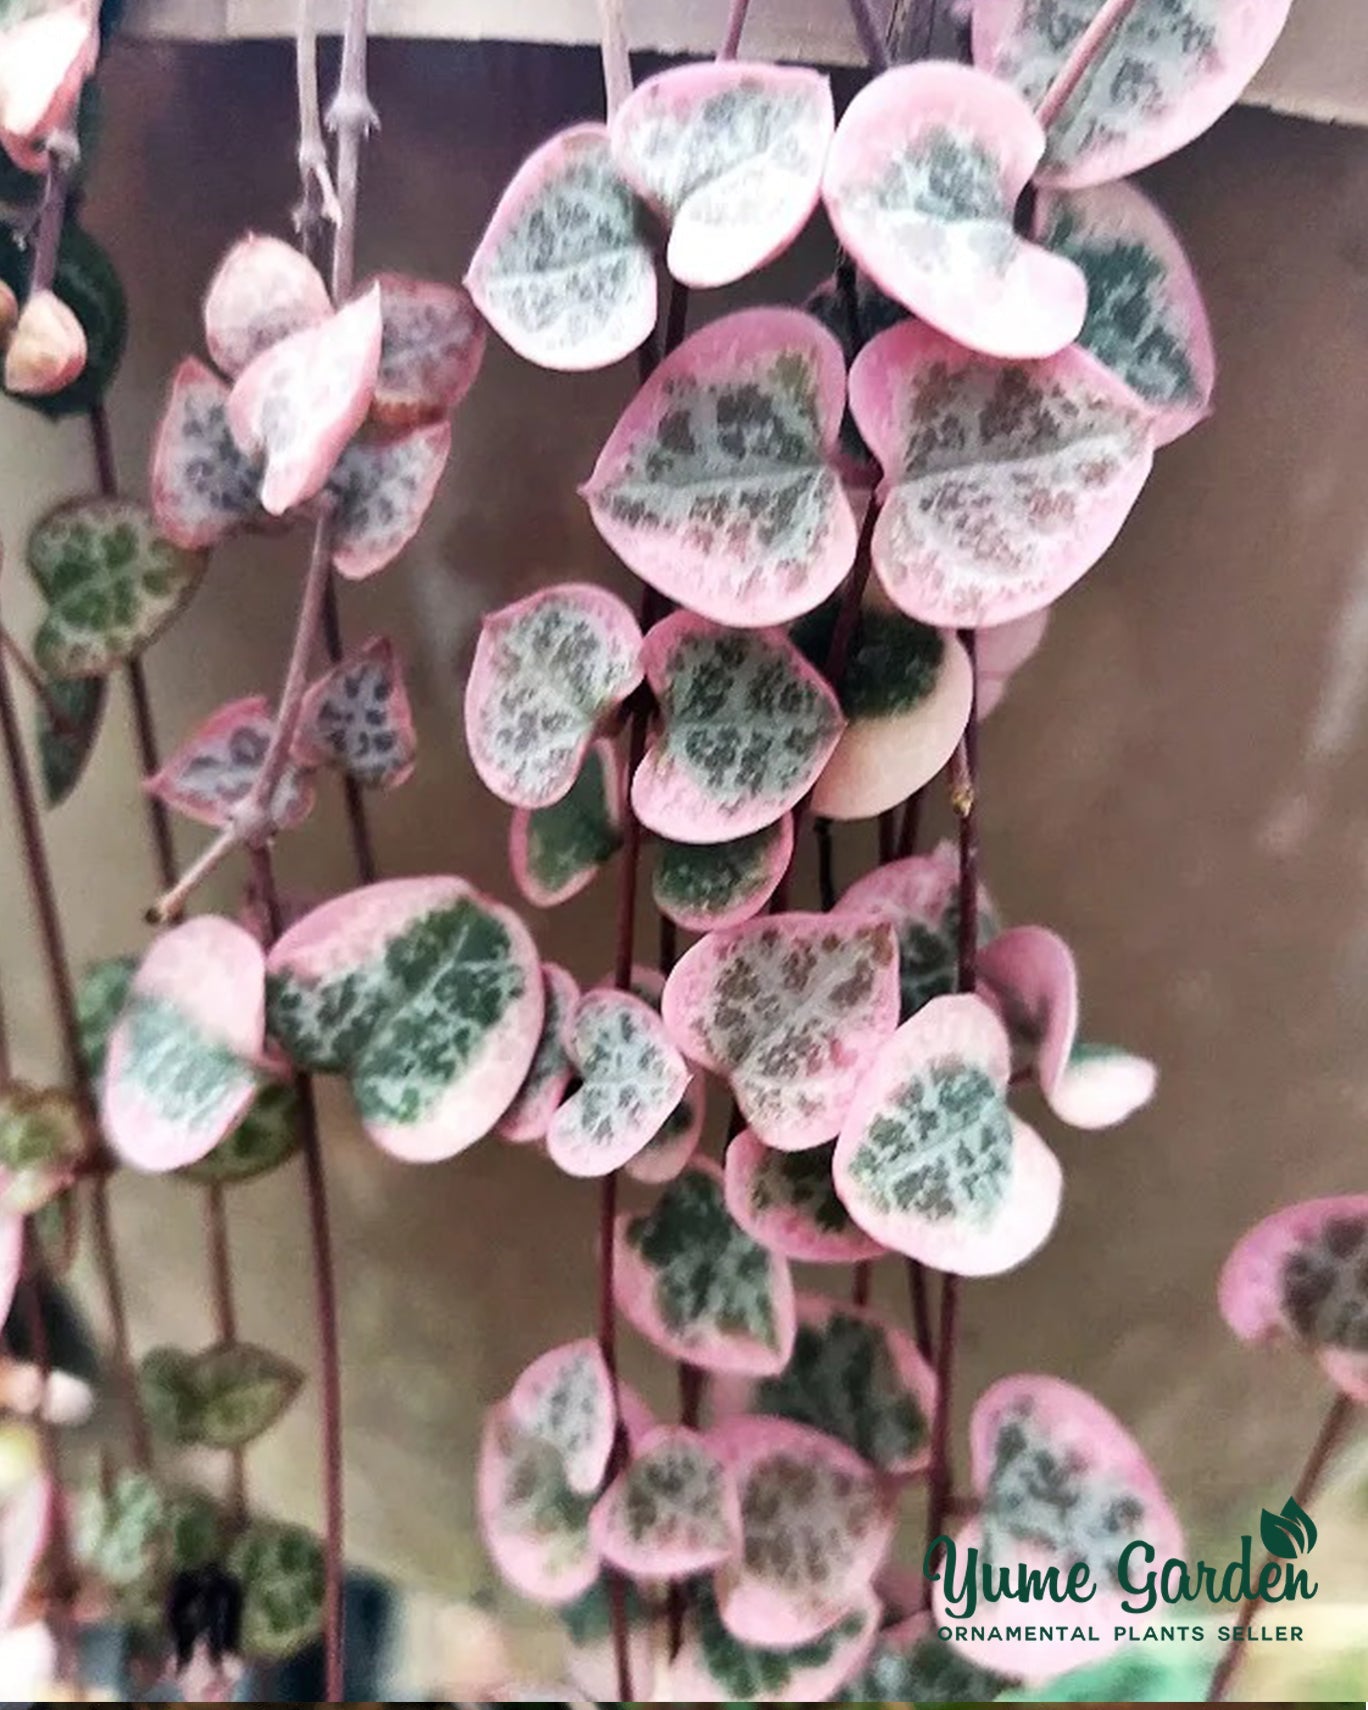 Ceropegia Woodii Variegated ‘String of Hearts’ - Yume Gardens Indonesia